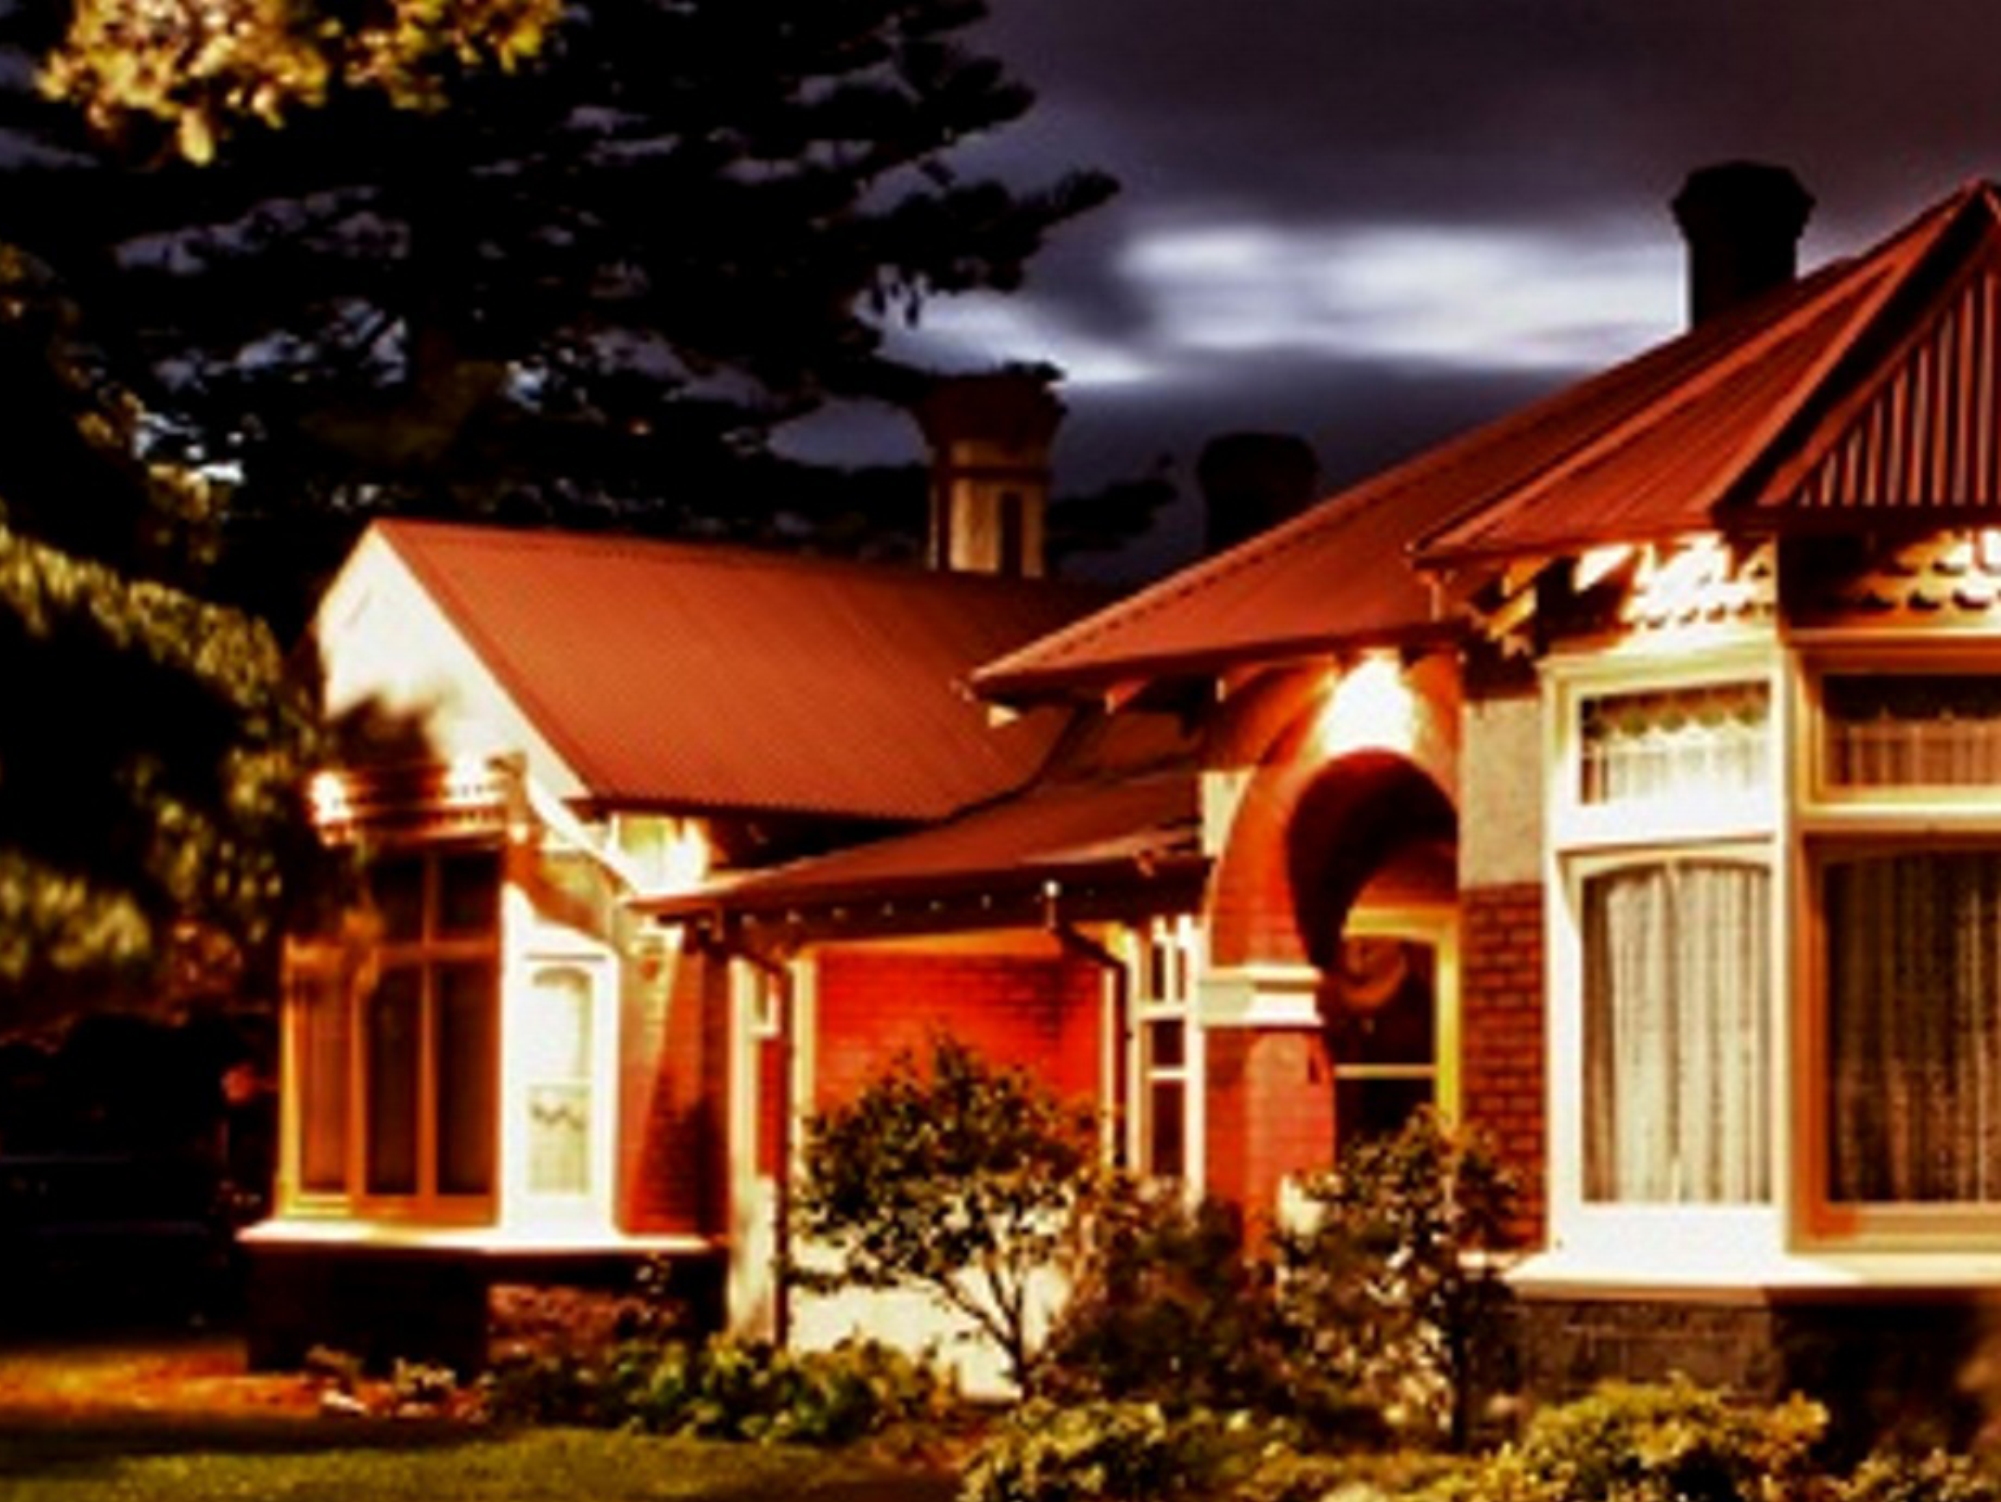 2021-Heritage-Hobsons-Bay-Altona-Homestead-Ghost-Tour-by-Lantern-Tours-Event-Image-A3436383.jpg